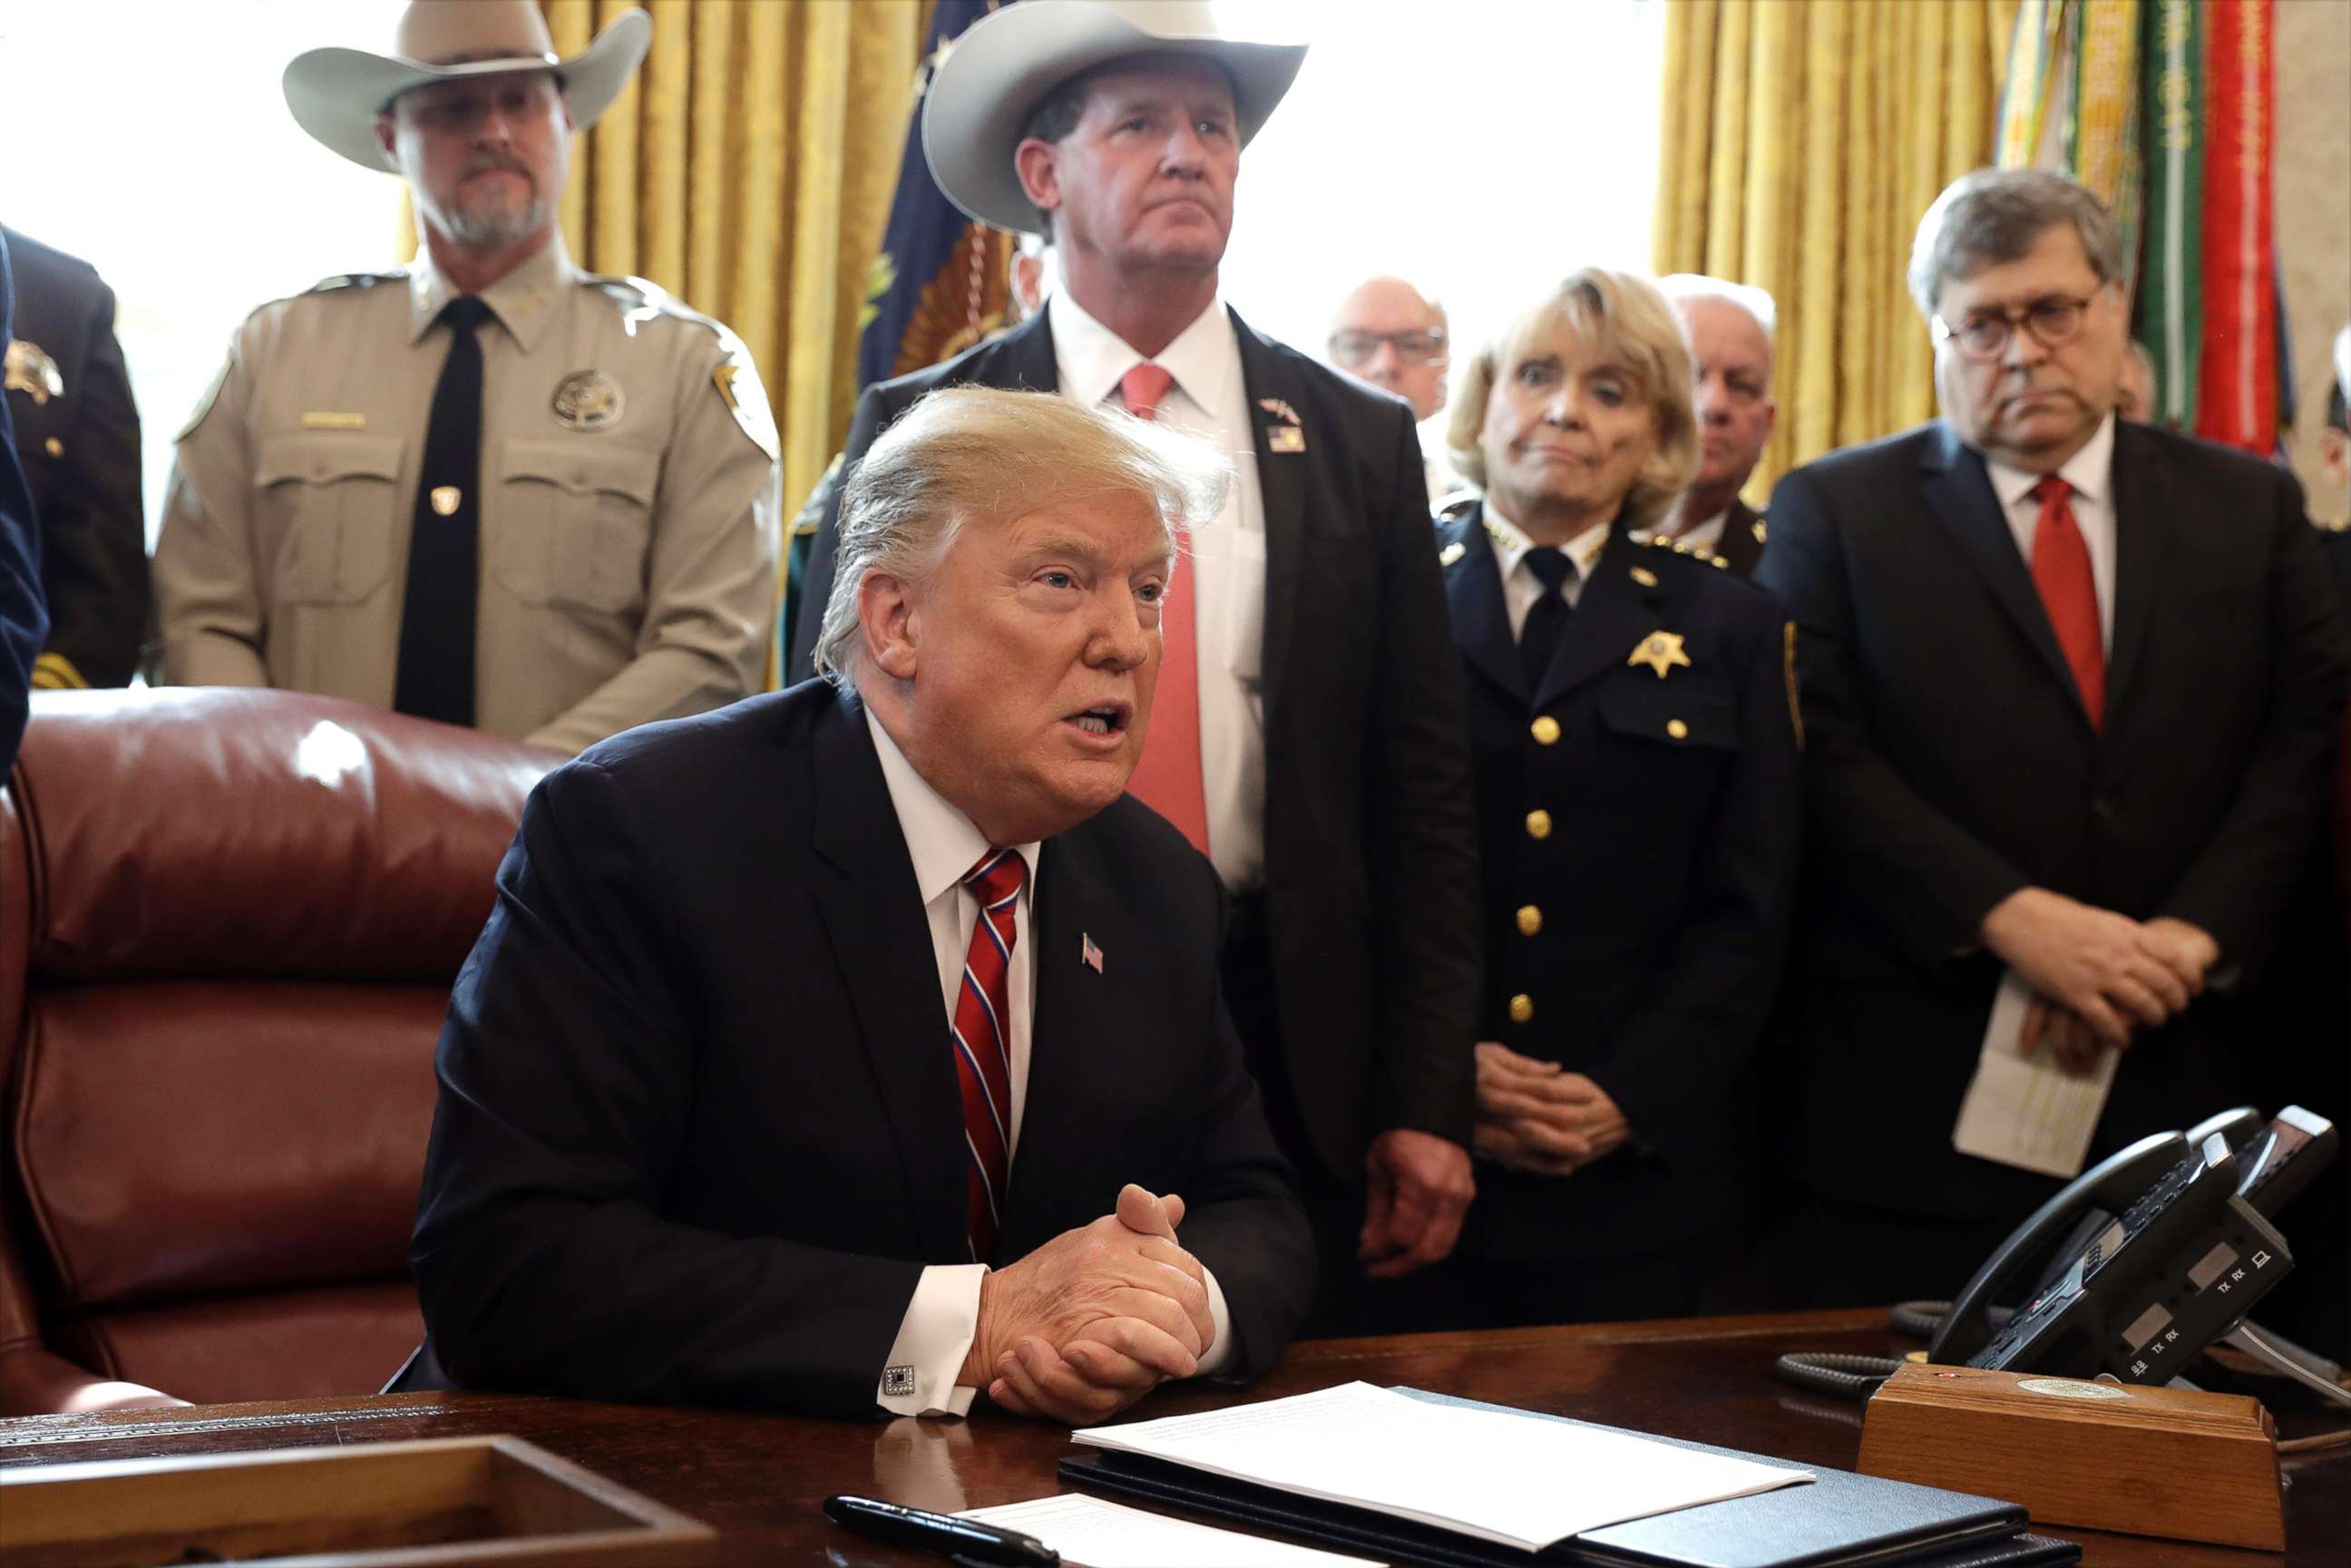 PHOTO: President Donald Trump speaks about border security in the Oval Office of the White House, March 15, 2019.